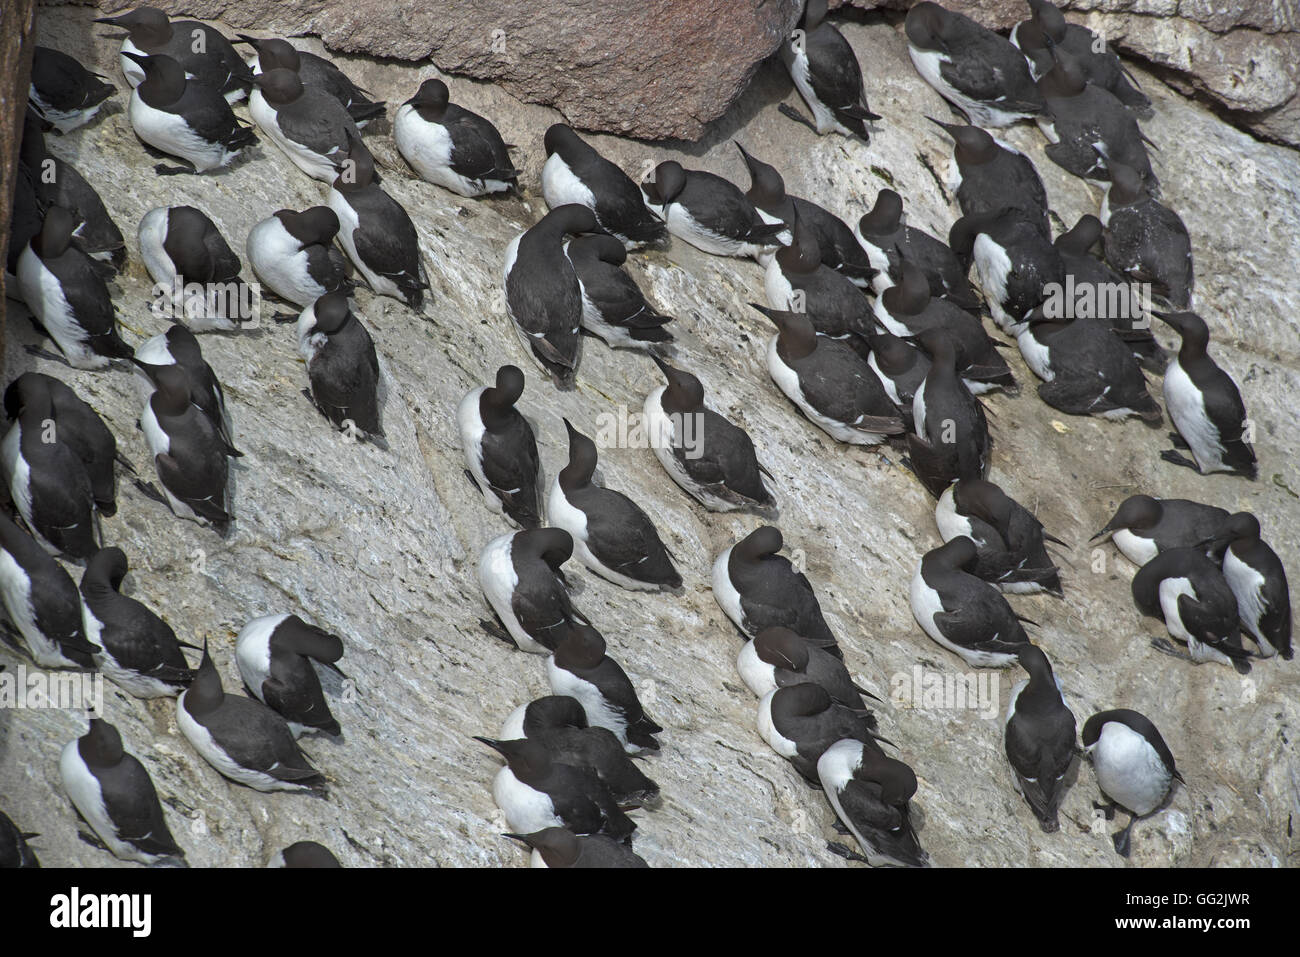 Colony of nesting seabirds, Common Guillemots Cling on to the Sea Cliffs near Peterhead, Aberdeenshire. SCO 11,114. Stock Photo